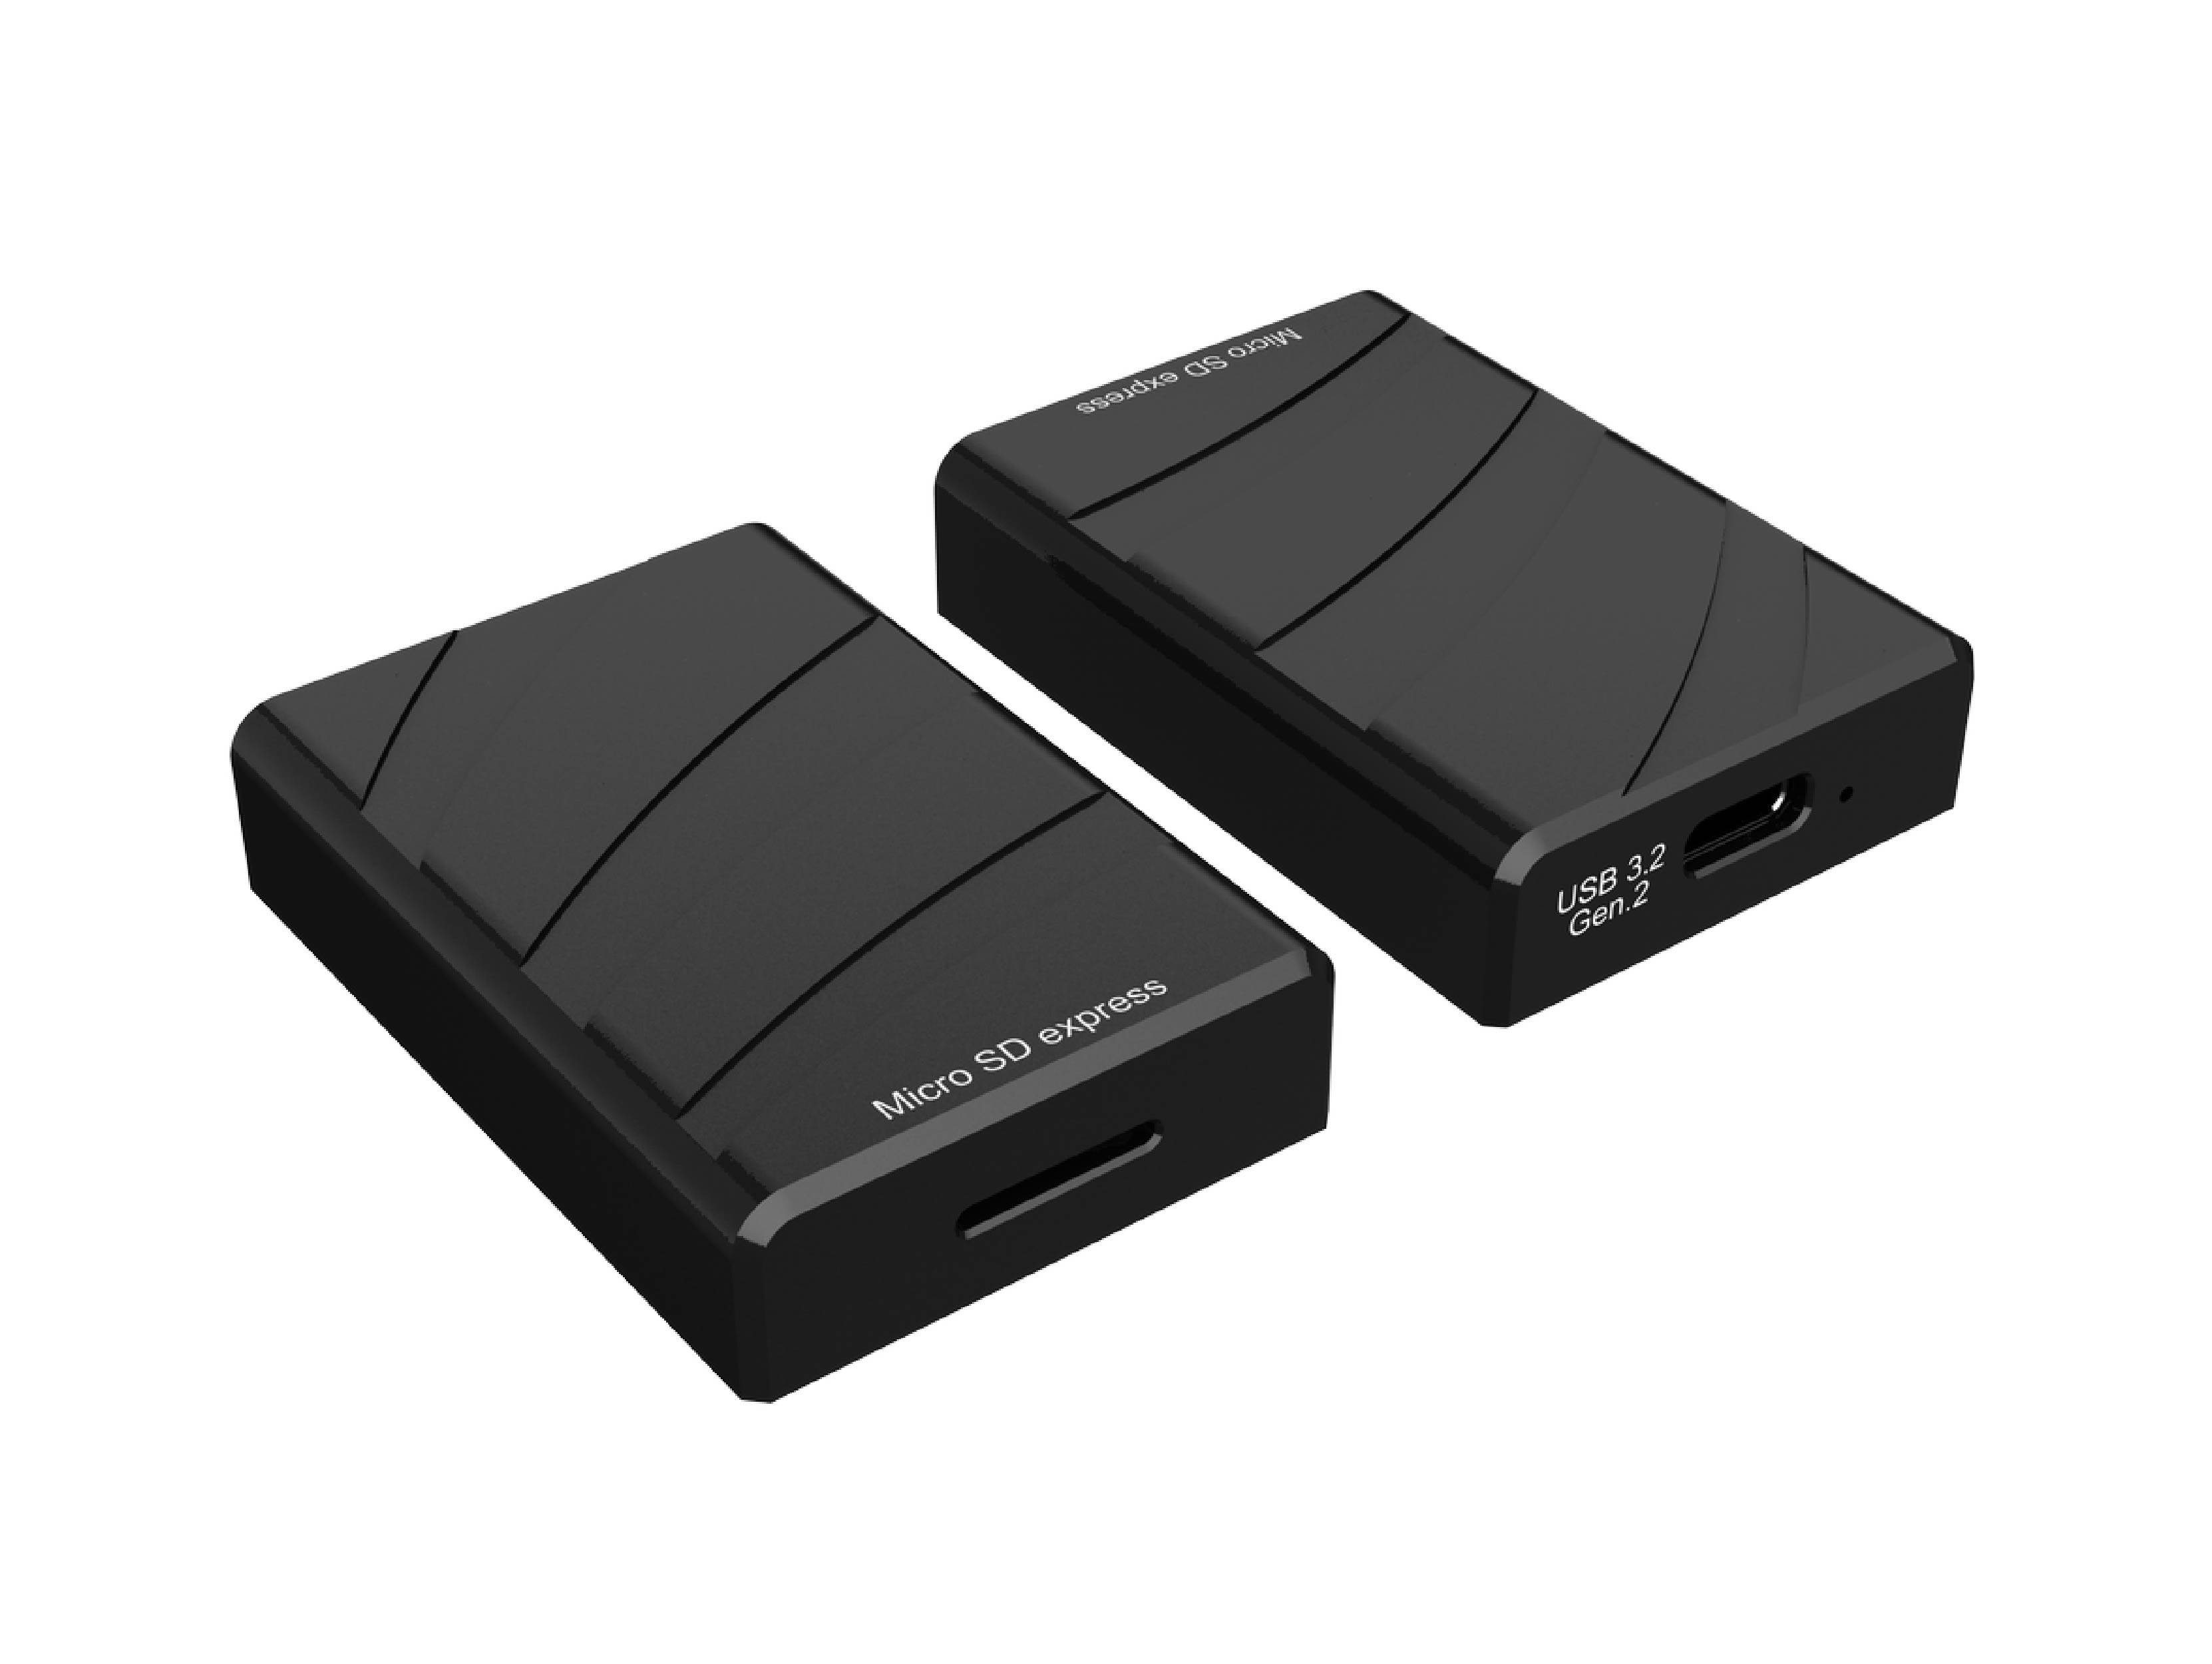 MicroSD Express Card Reader (SI-4203MSDEX), USB3.2 Type-C supports 10Gbps to host, USB3.2 -C 10Gbps.